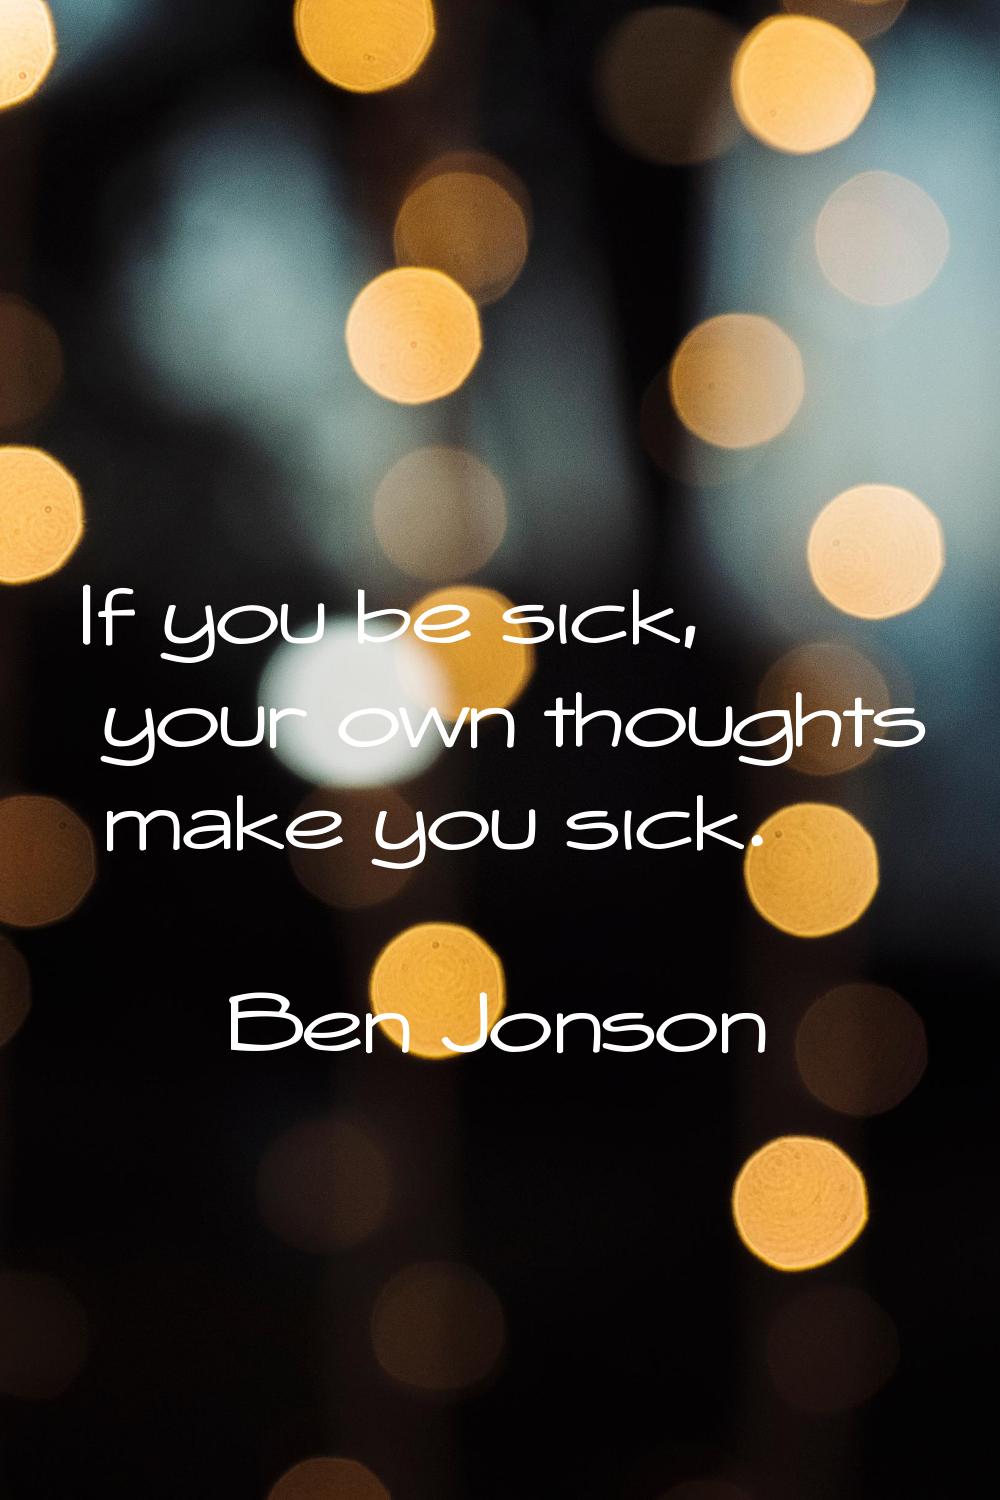 If you be sick, your own thoughts make you sick.